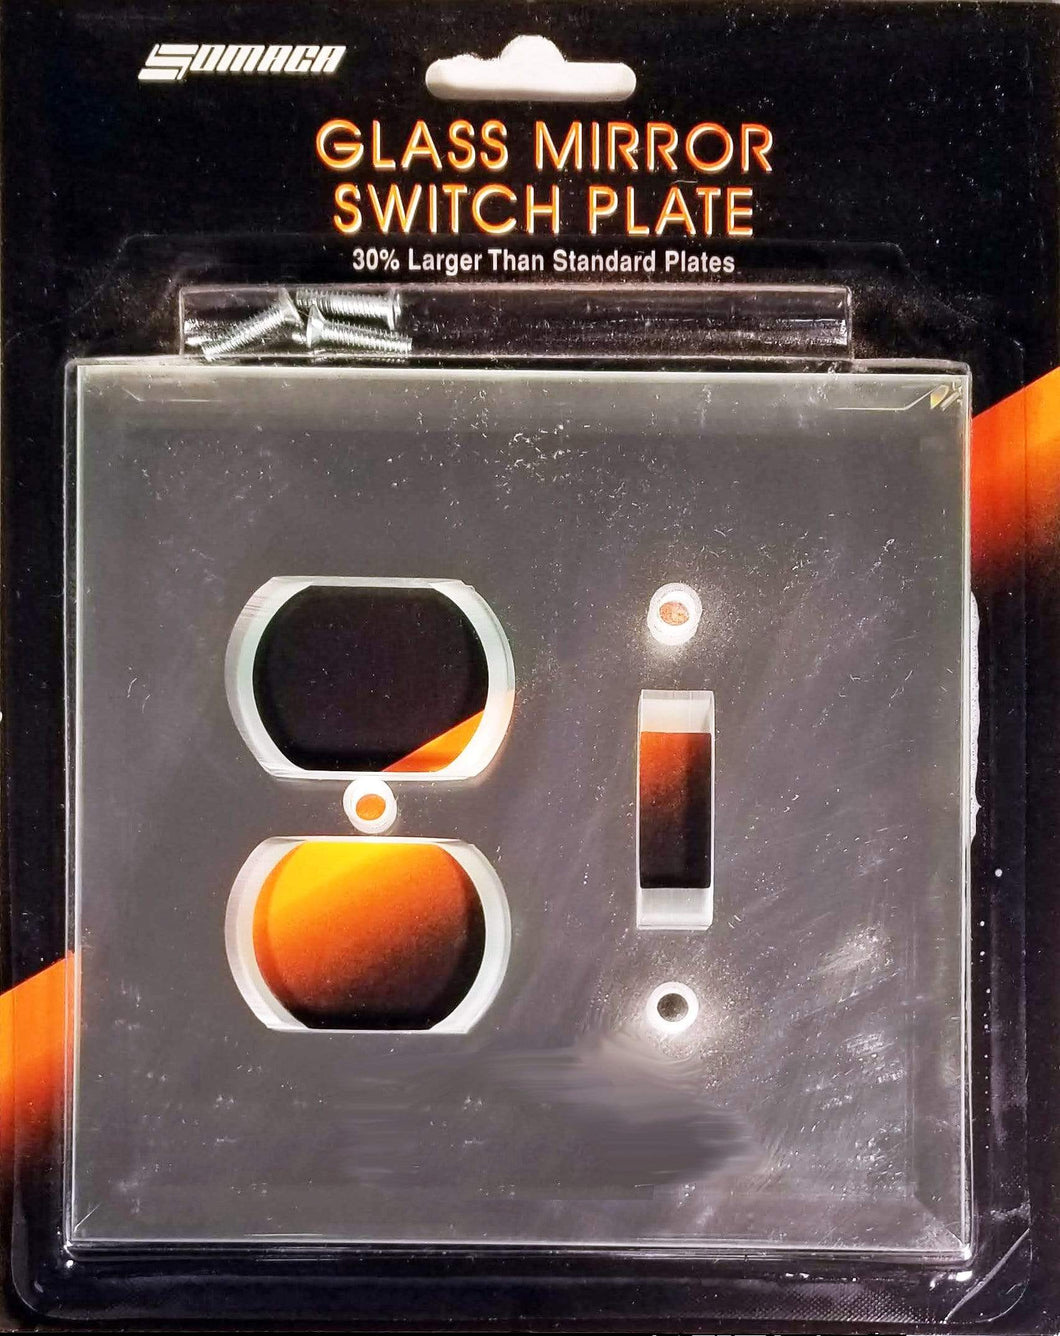 Sy Derin Switch Plate Glass Mirror Double Duplex & Switch Plate: Clear Mirror- GLS-C7 GLS-C7